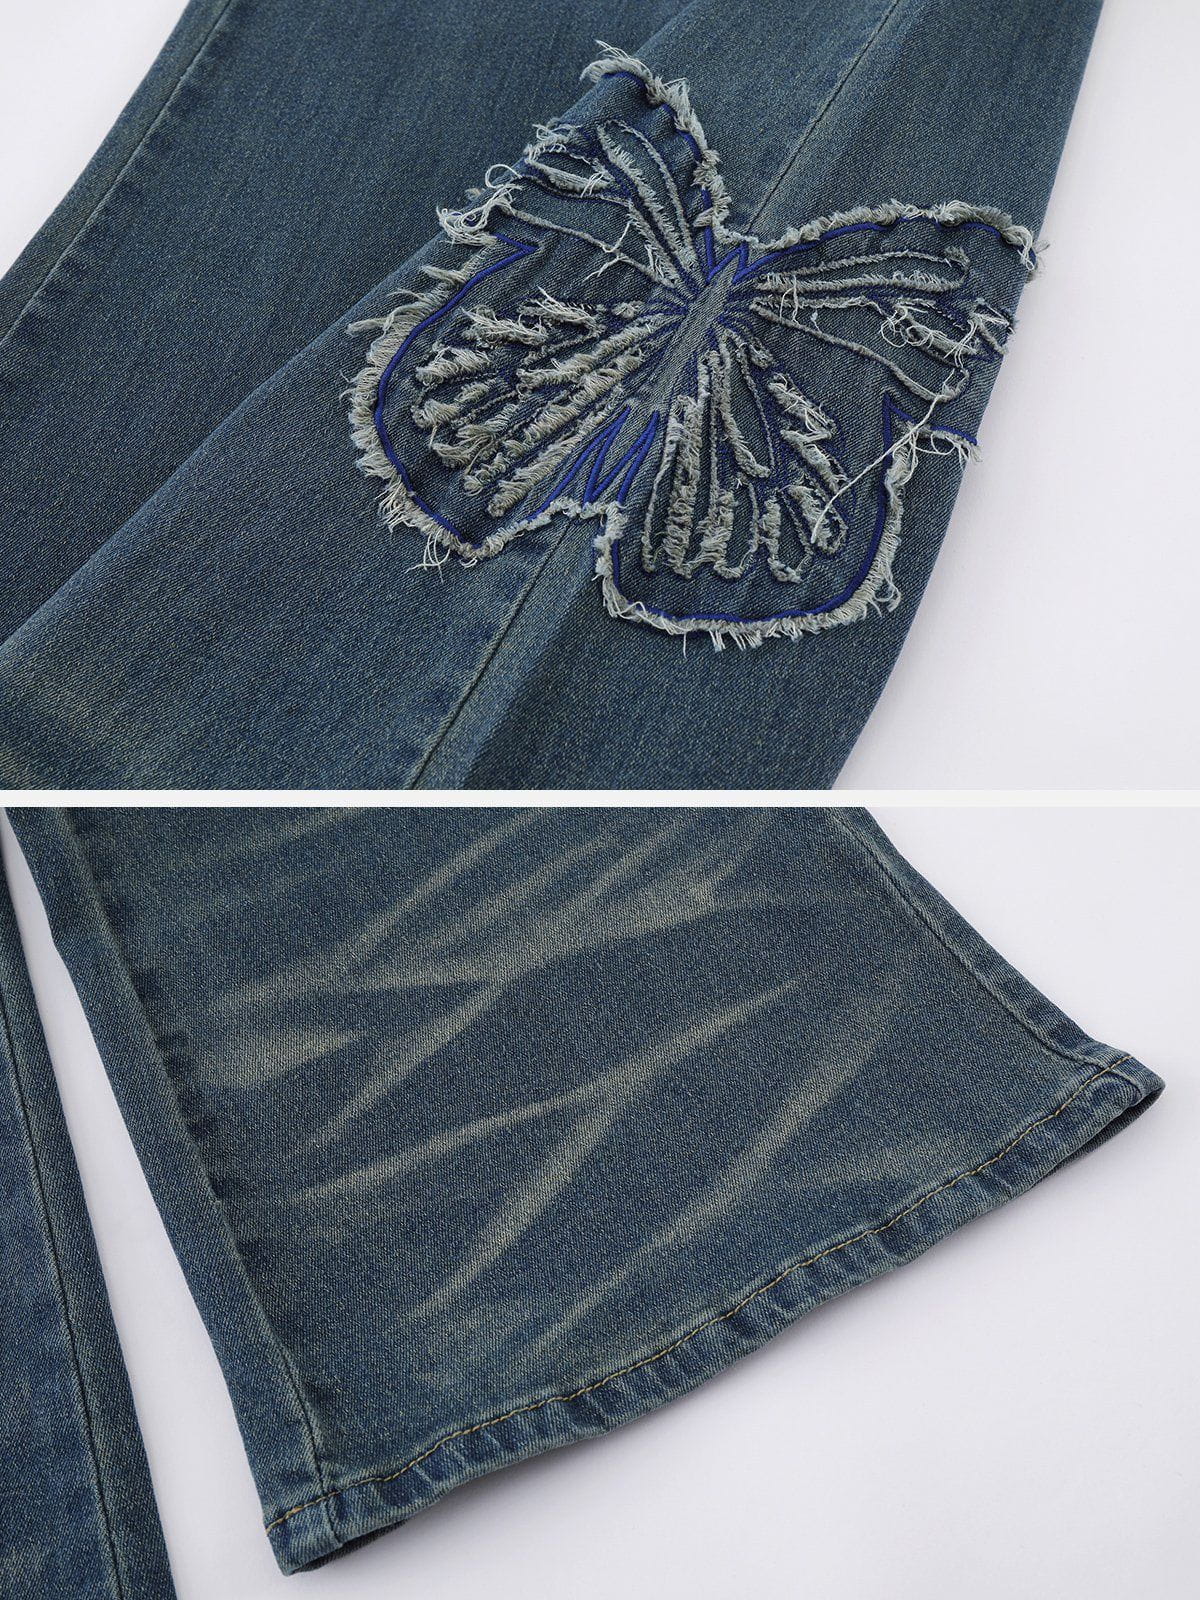 Embroidery Butterfly Jeans Faire Echo